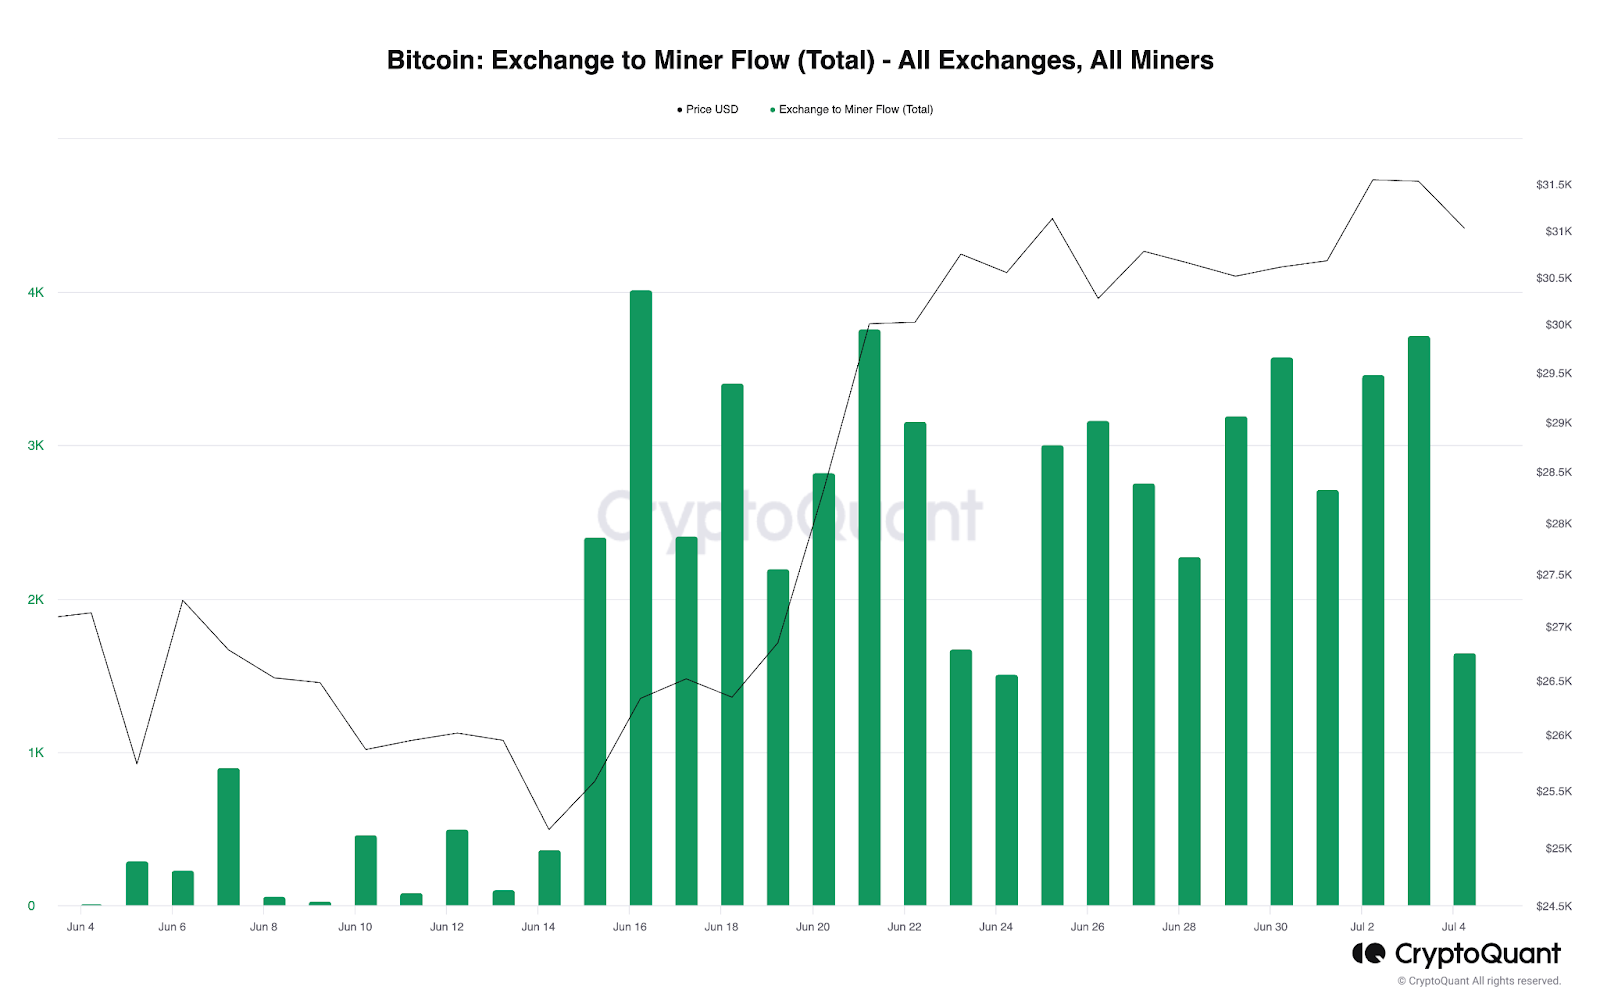 Bitcoin exchange to miner flow chart for the past 30 days